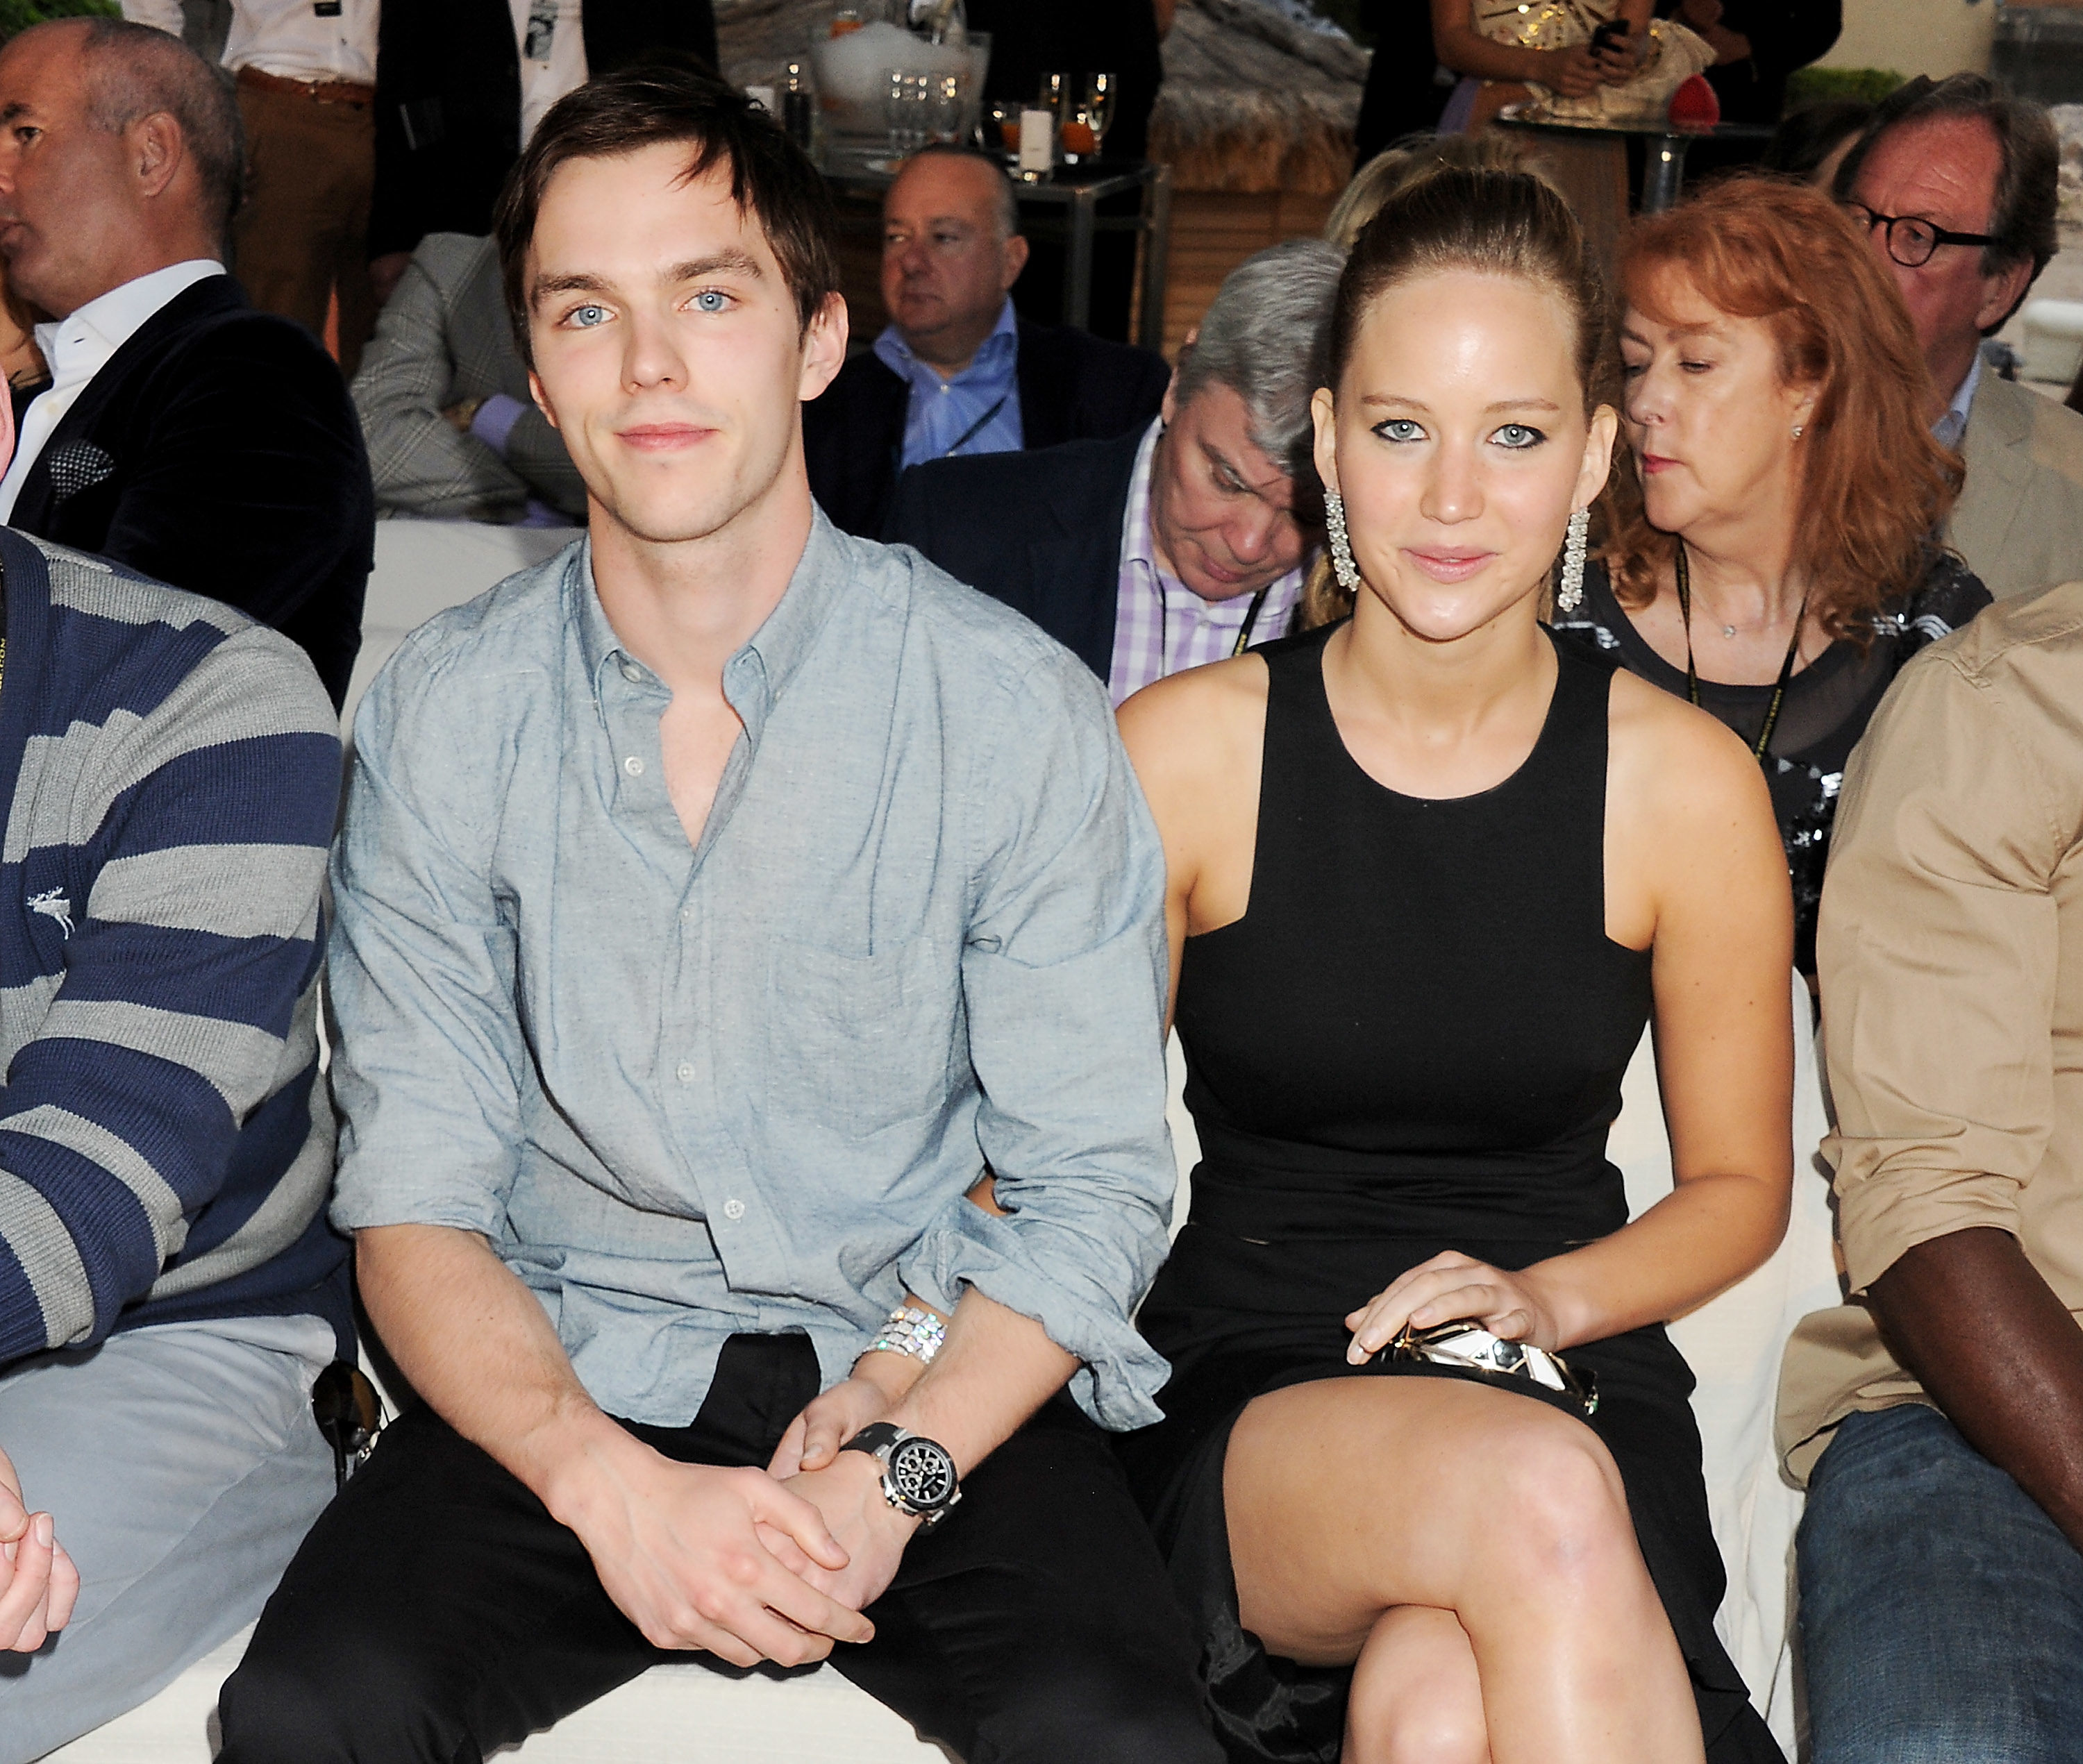 Jennifer and Nicholas sitting together and smiling